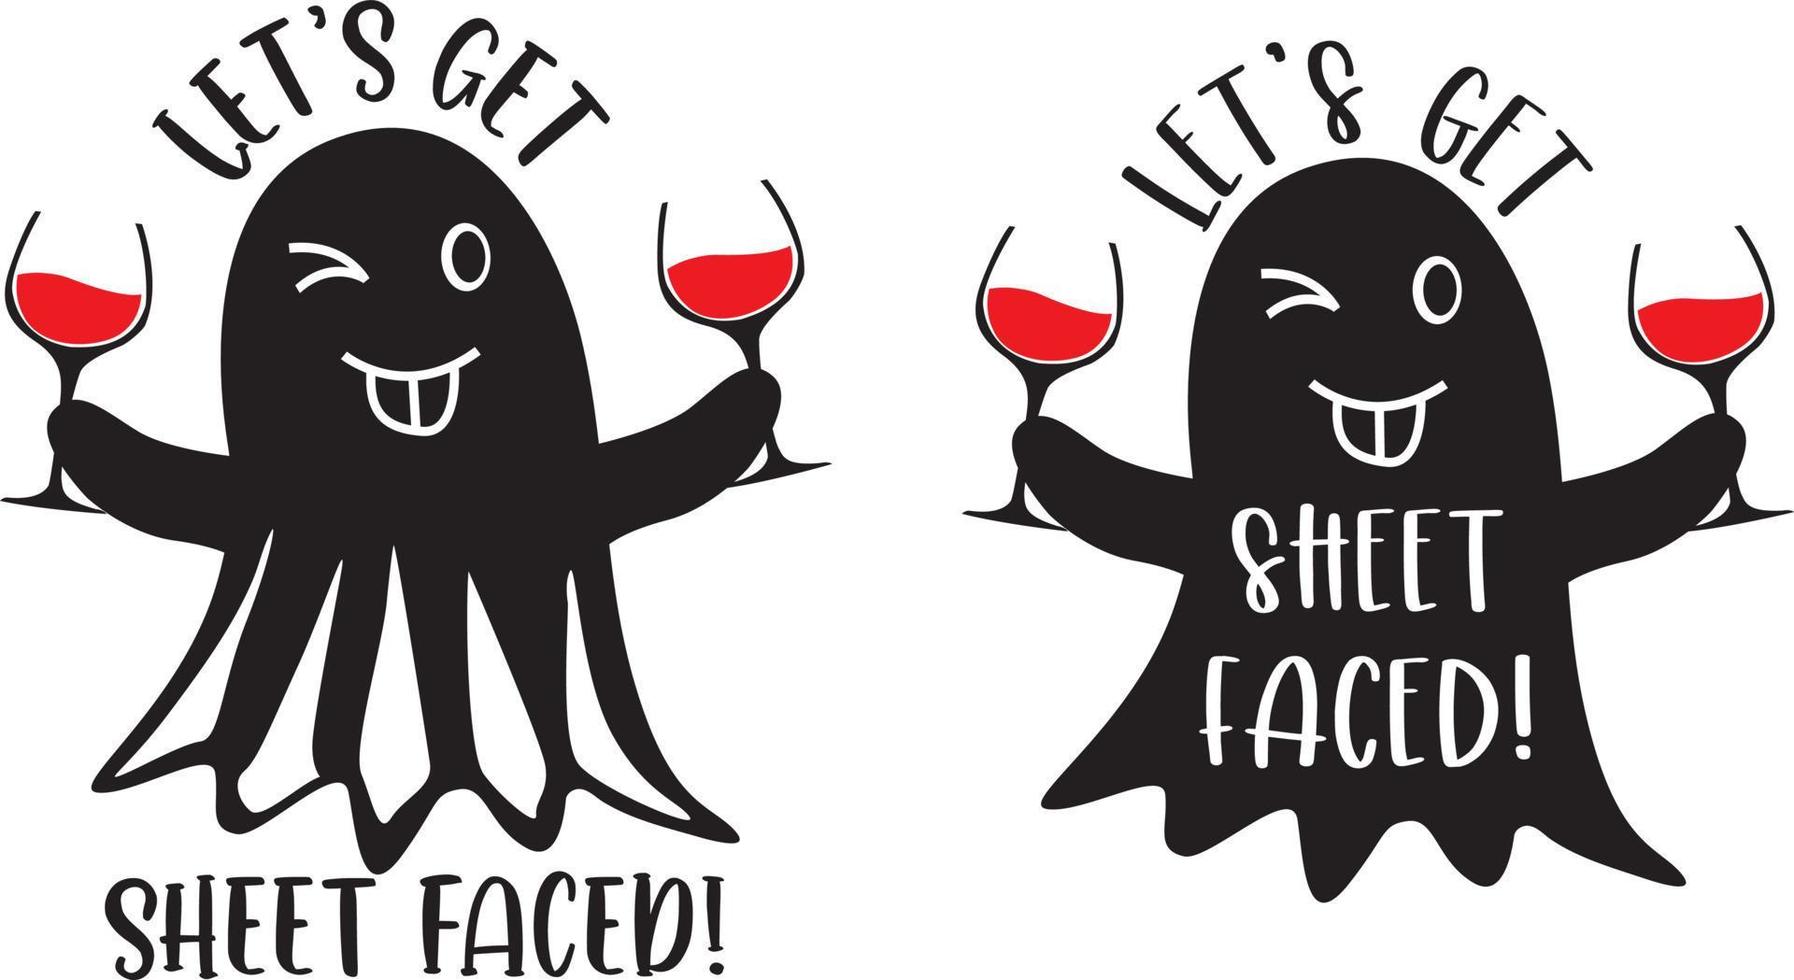 Let's Get Sheetfaced, Halloween Holiday, Happy Halloween, Vector Illustration File